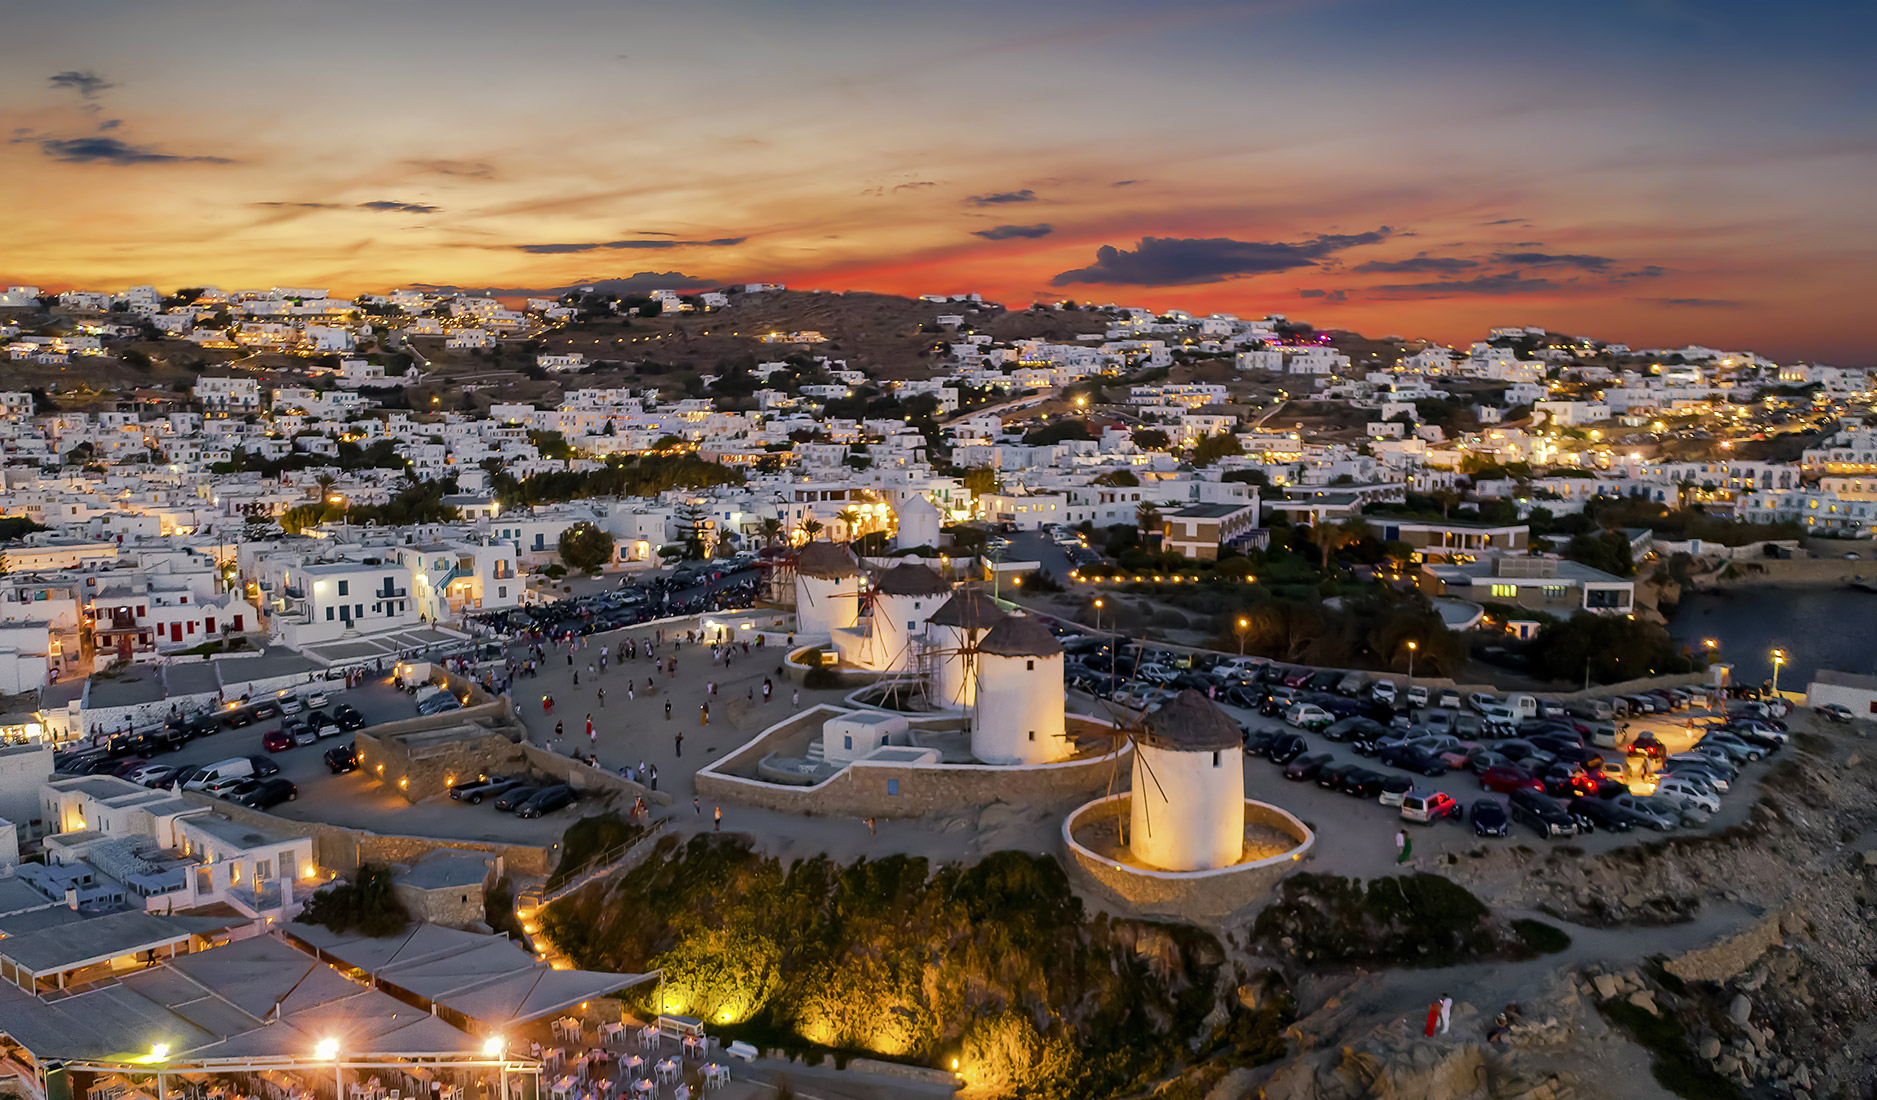 Visiting Mykonos Windmills during the golden hour, either at sunrise or sunset